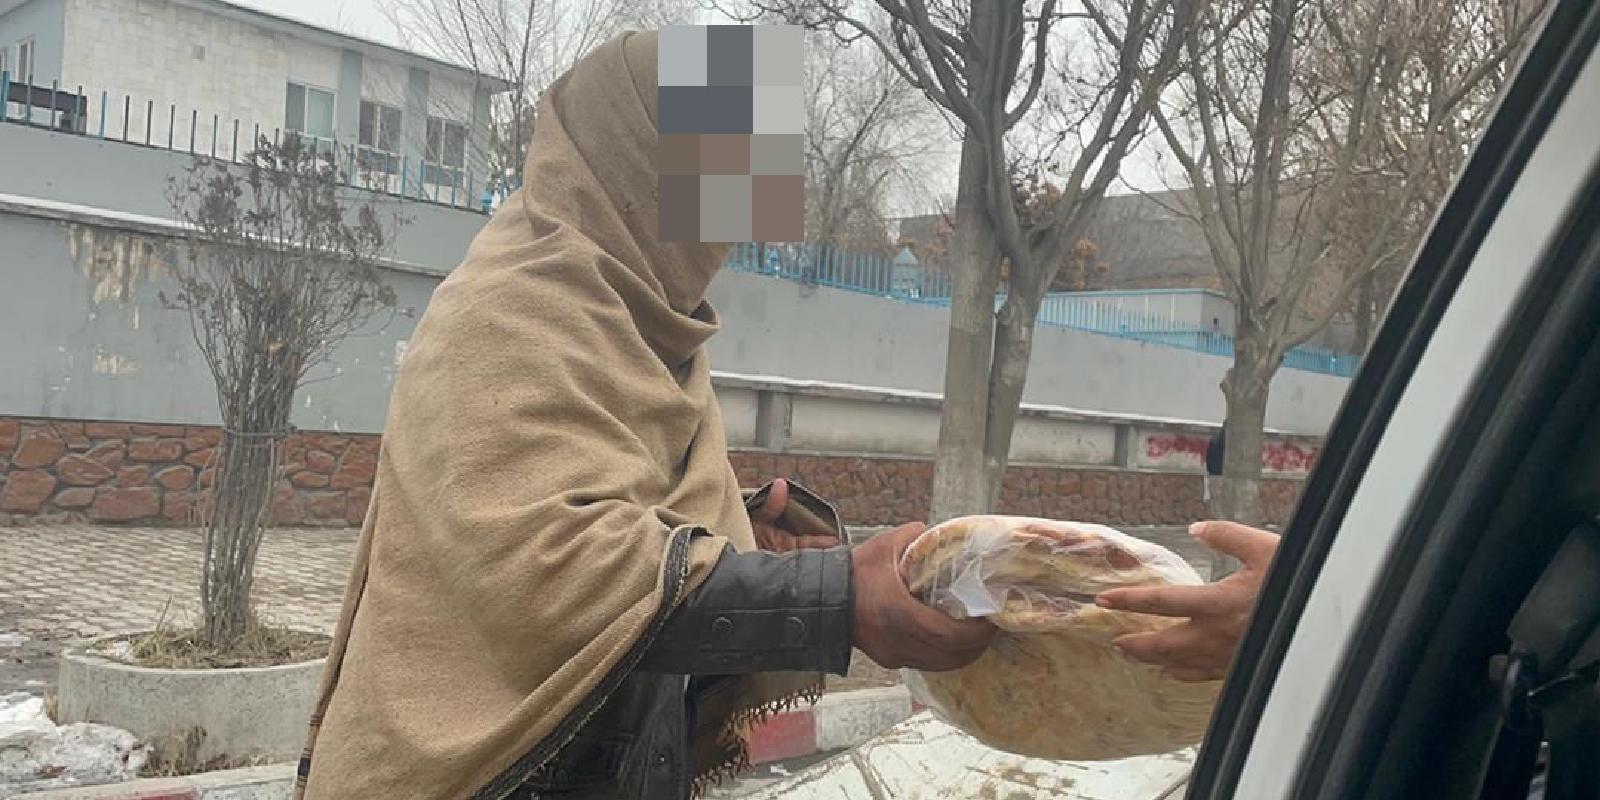 Bread is also occasionally distributed on the streets of Kabul